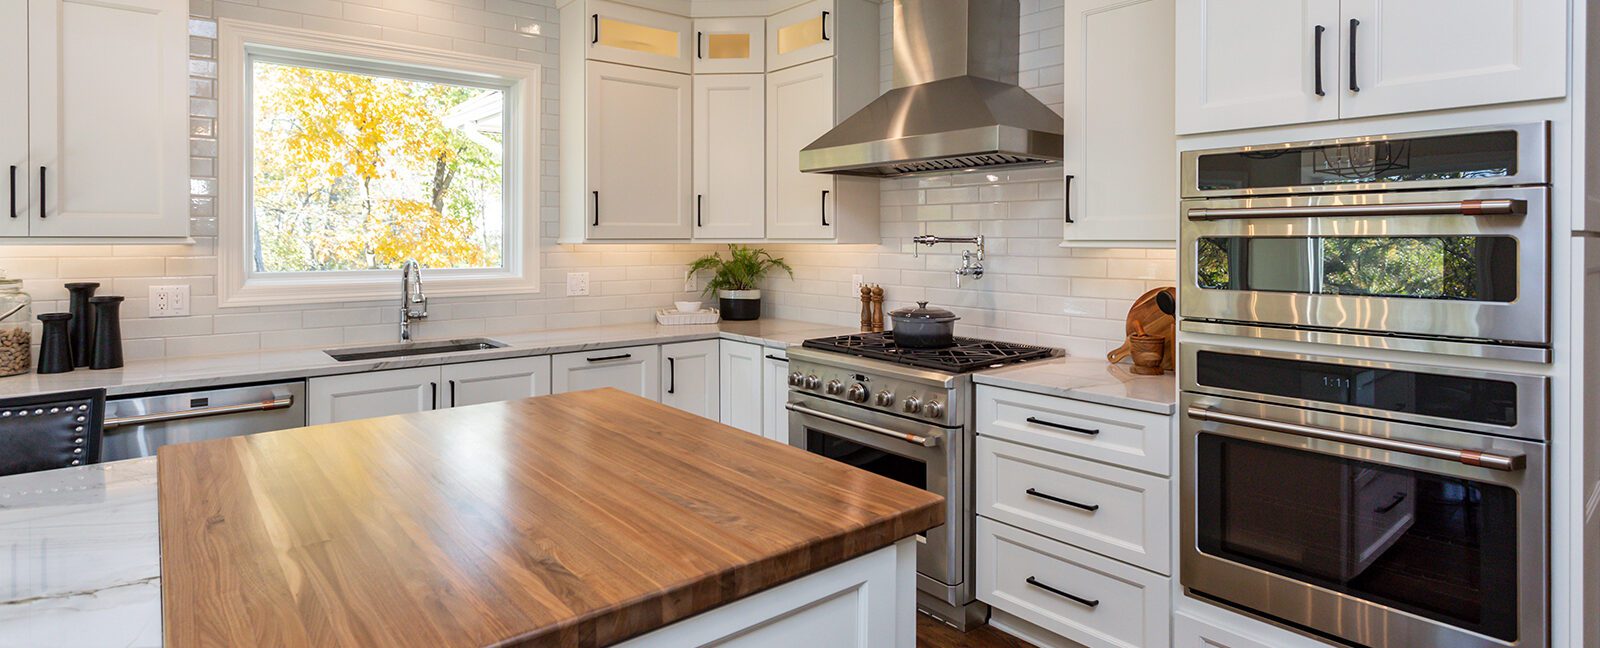 A kitchen with a wooden countertop